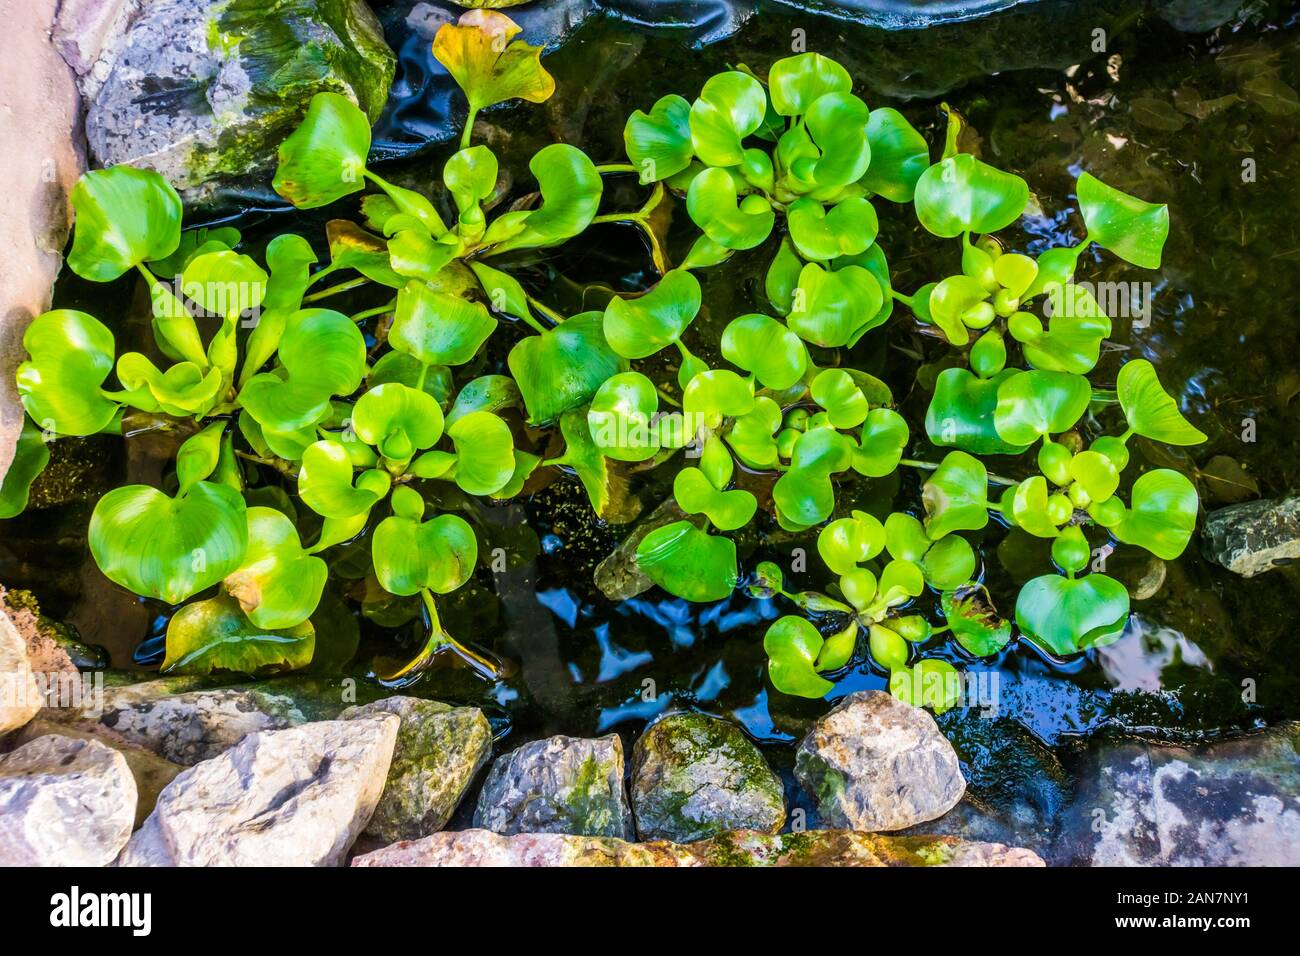 common water hyacinth plants in a water pond, popular tropical aquatic plant specie from america Stock Photo